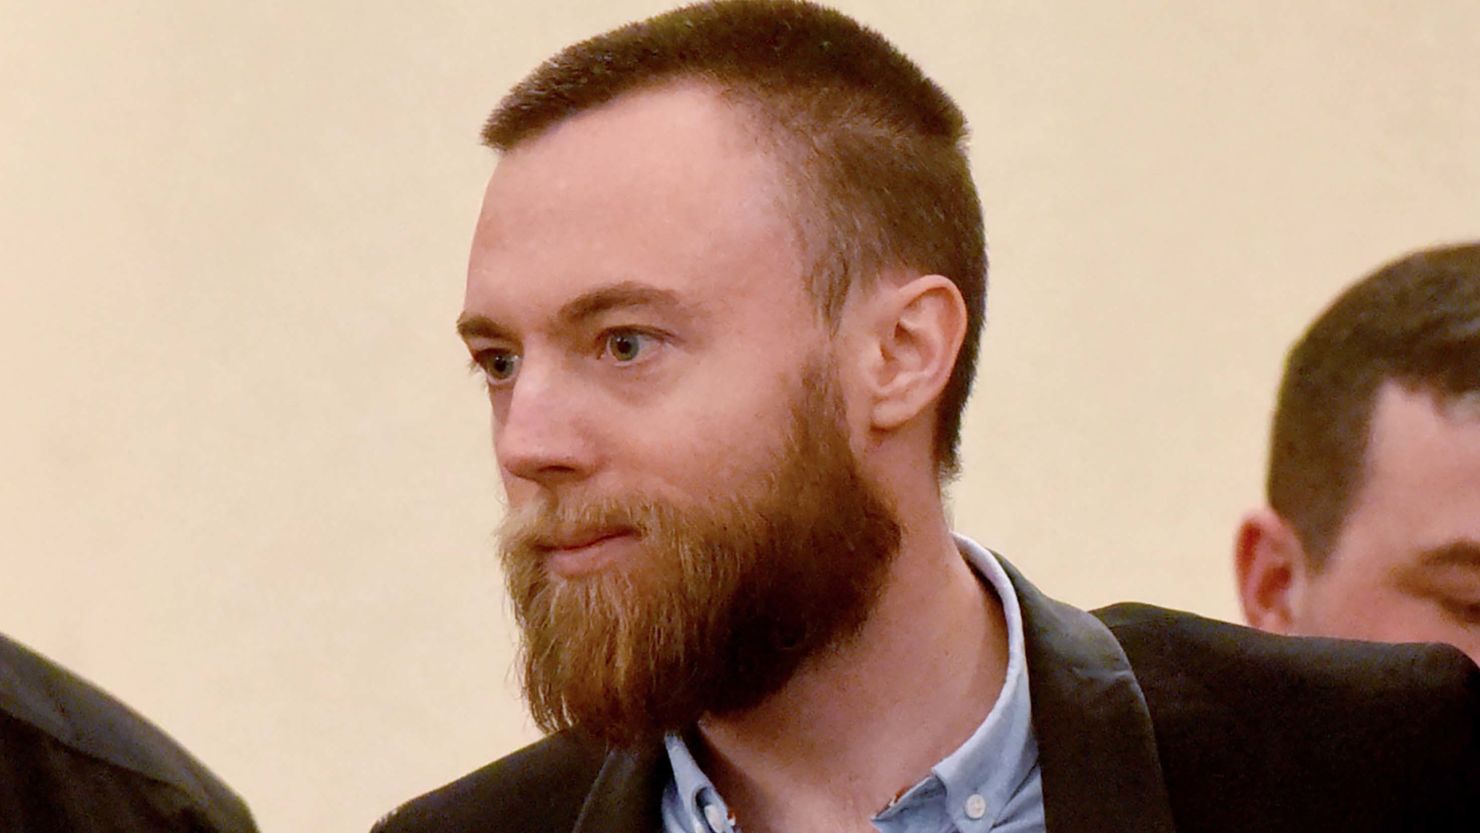 Jack Shepherd appeared in court in Tbilisi, Georgia on Friday after handing himself in to police on Wednesday.